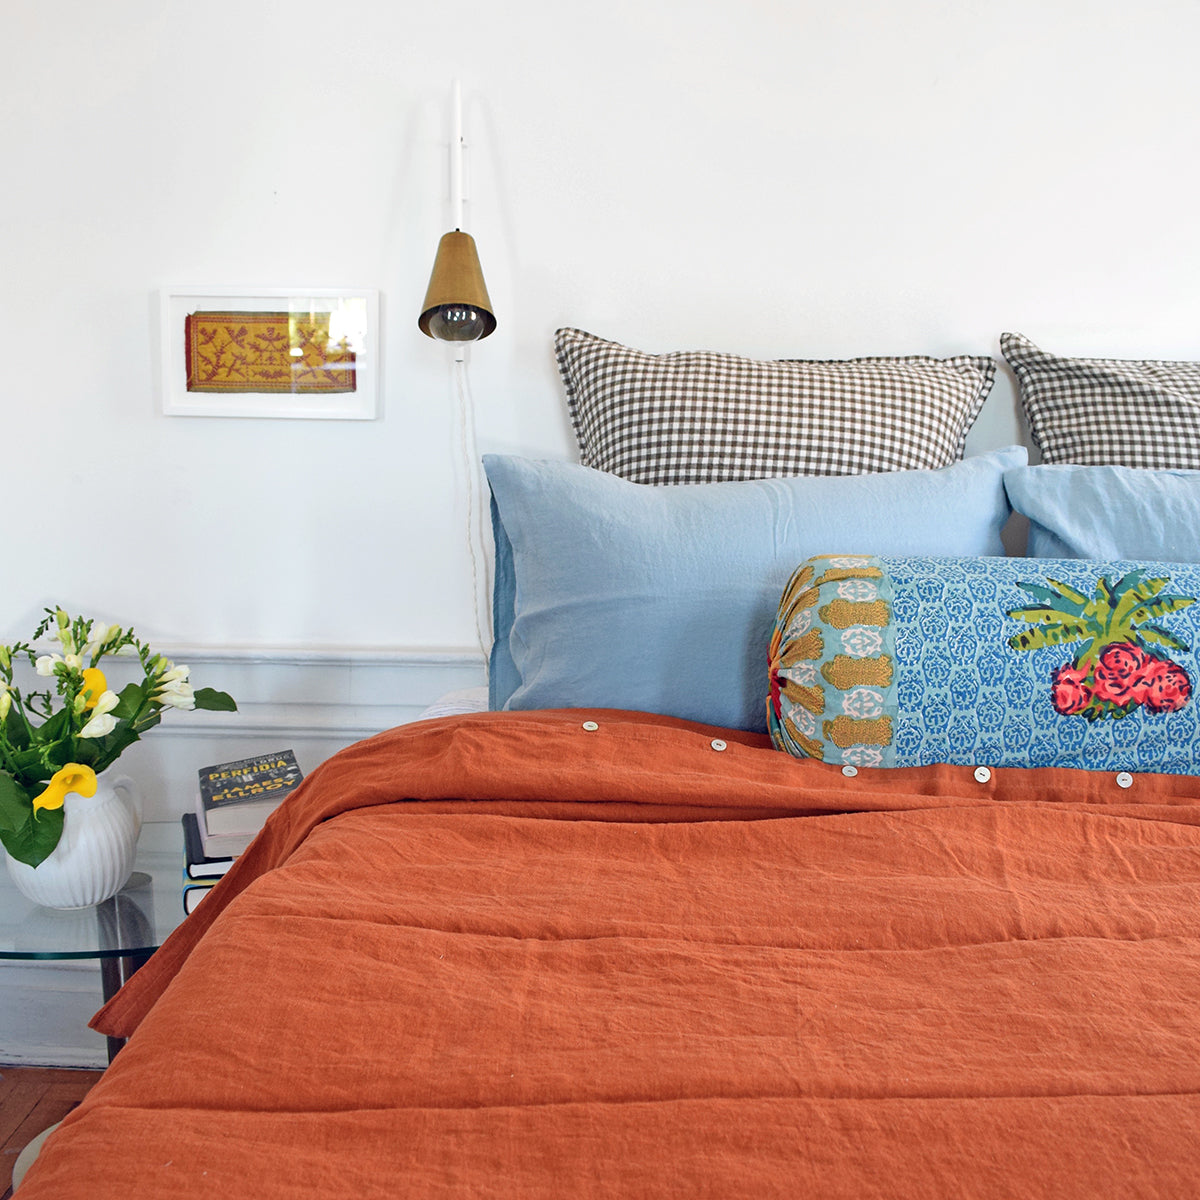 A Linge Particulier Linen Duvet in Sienna gives a orange and rust color to this duvet for a colorful linen bedding look from Collyer&#39;s Mansion